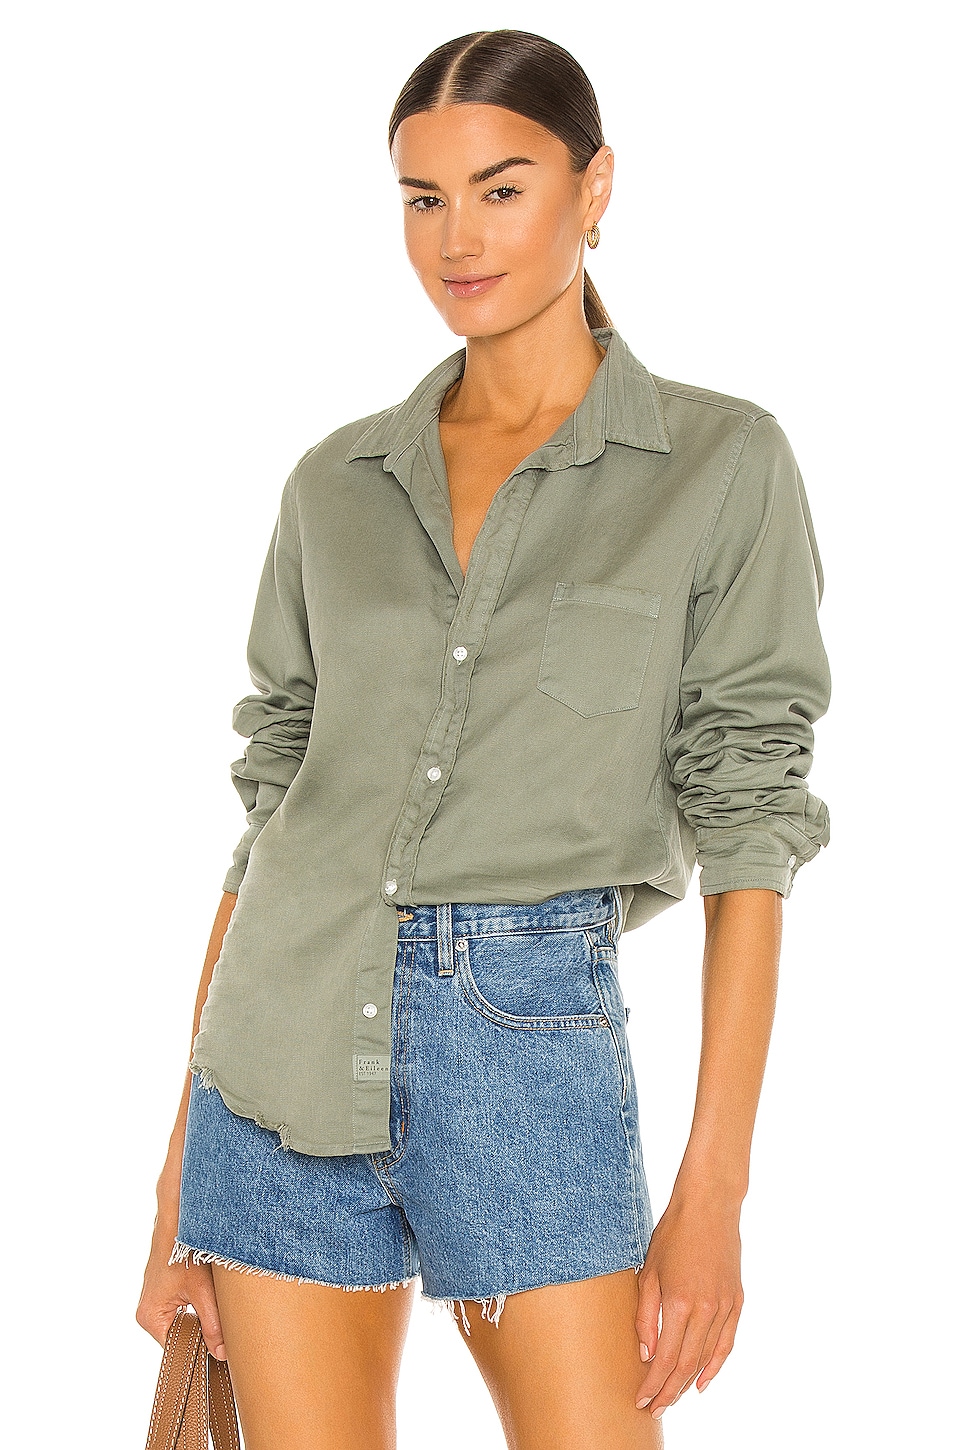 Frank & Eileen Barry Woven Button Up in Sage Tattered Denim | REVOLVE